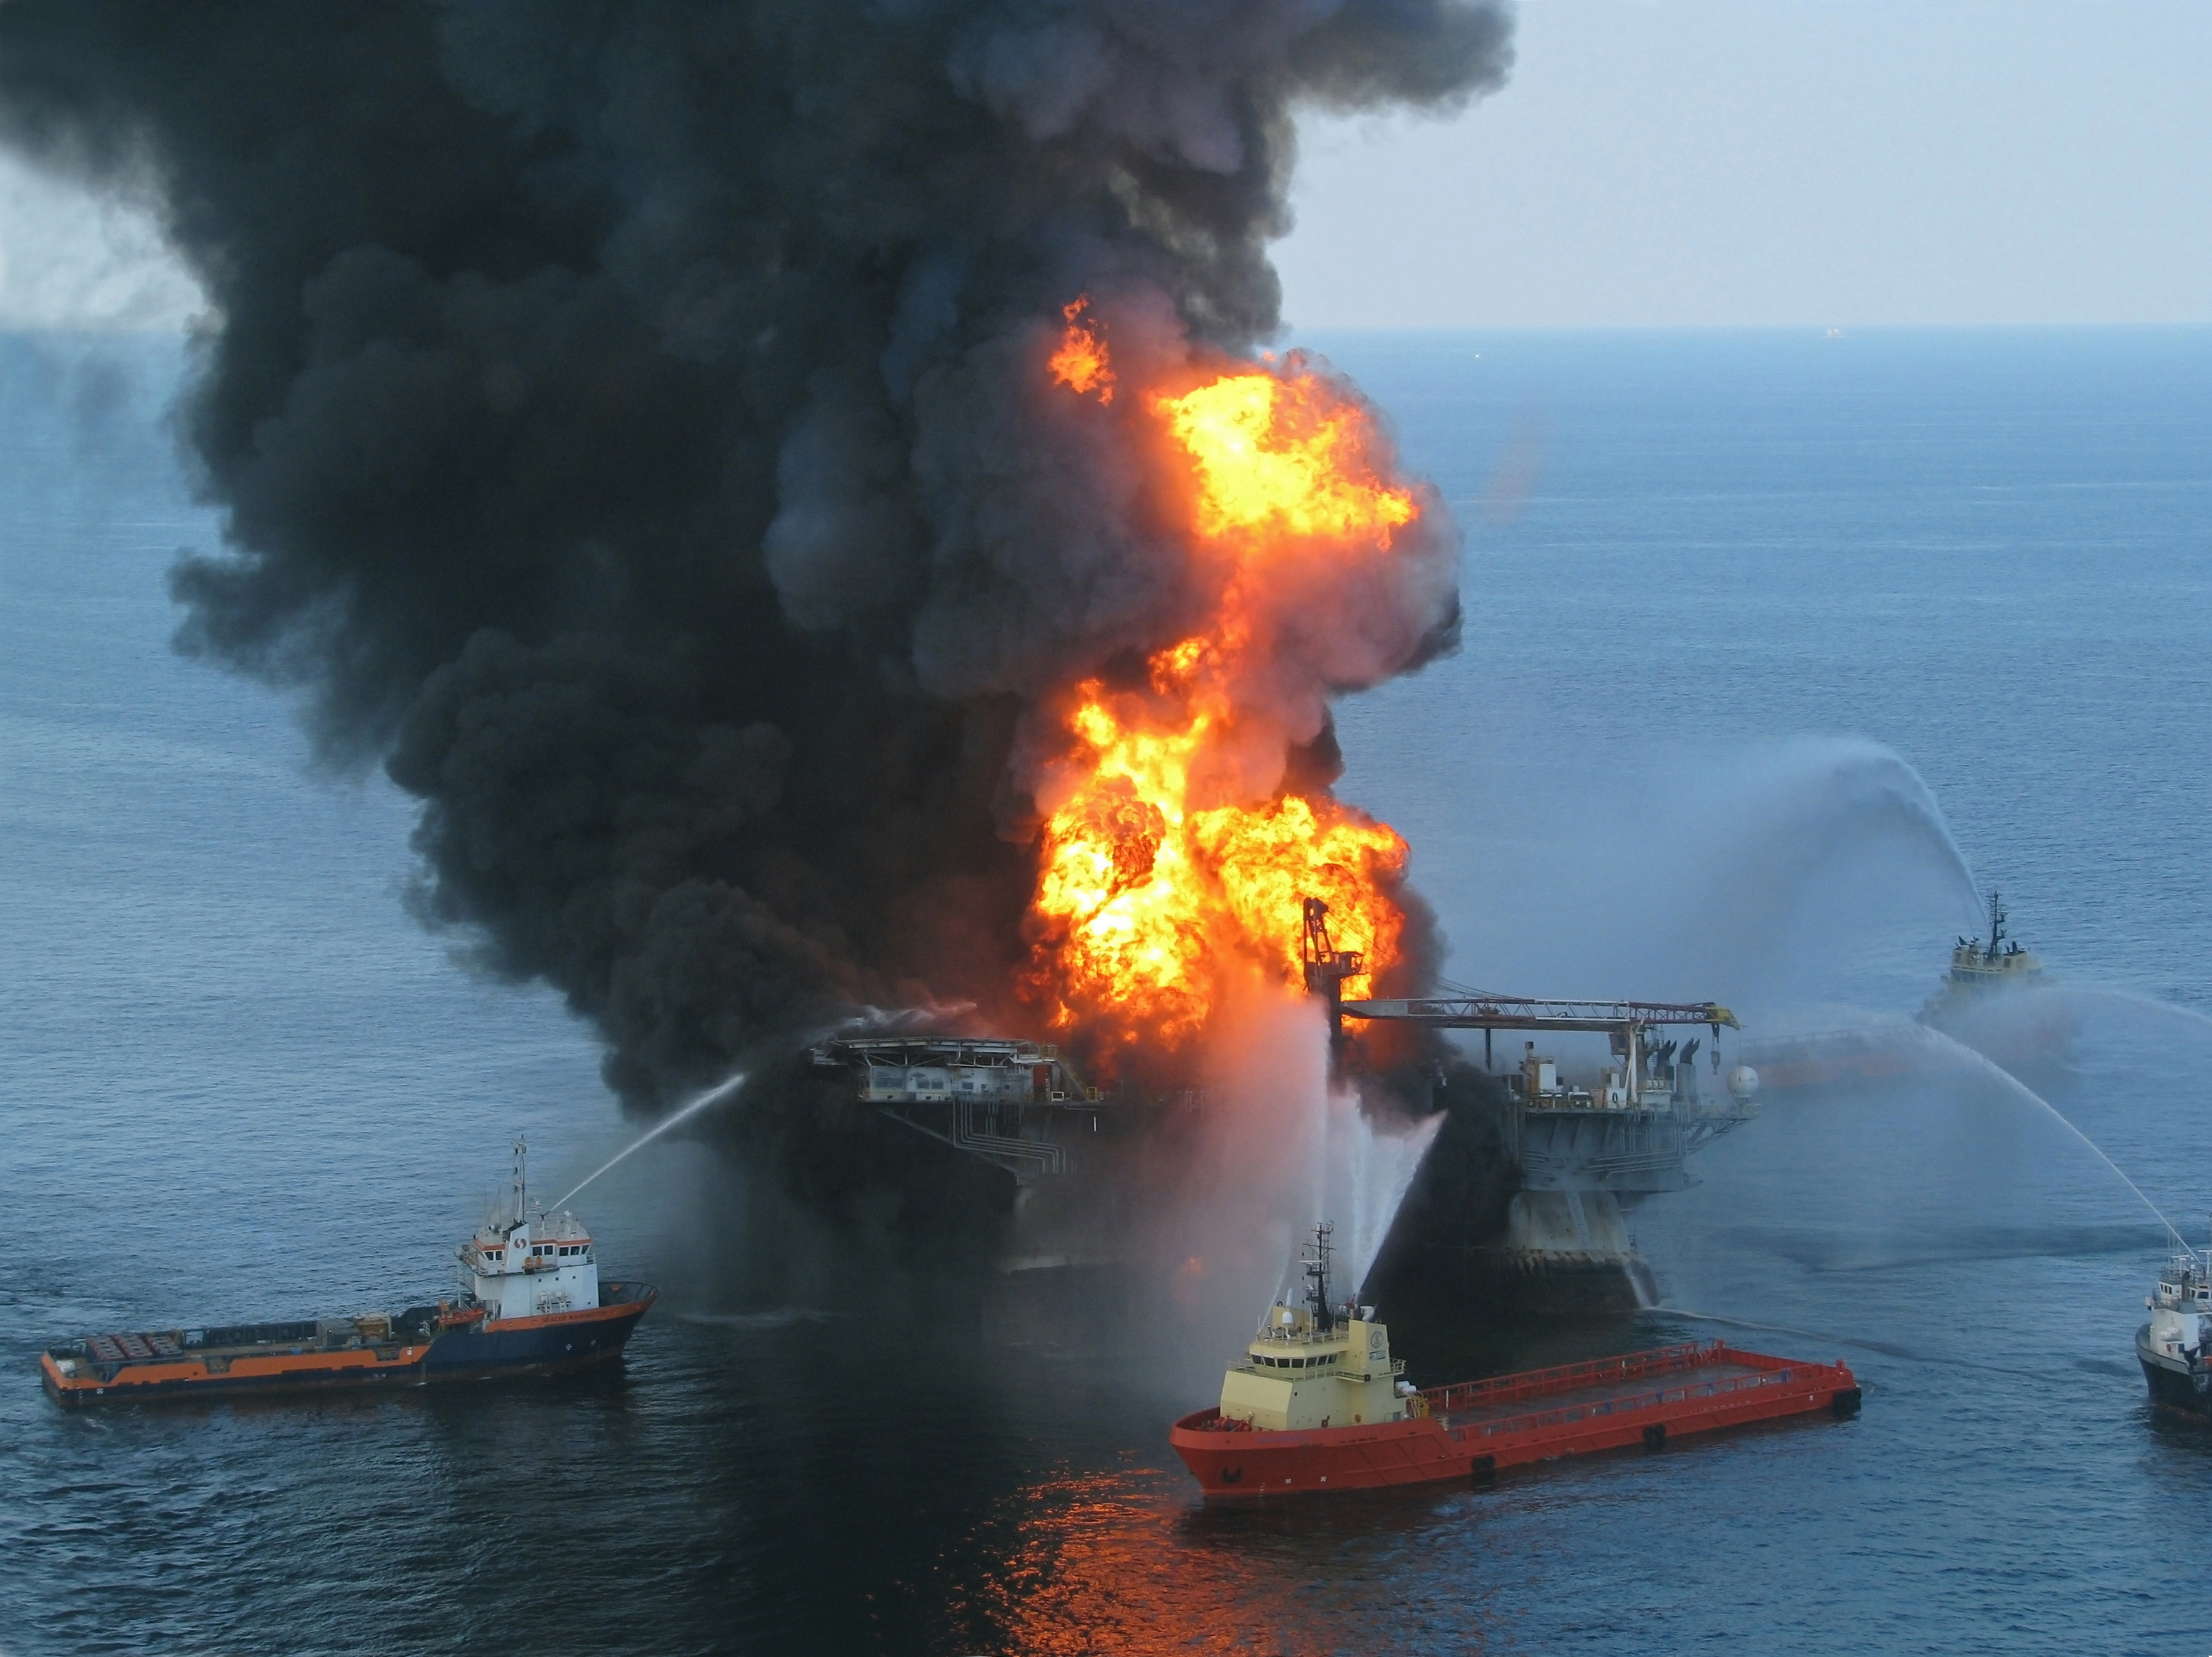 Ships spray a fire on the ocean resulting from an oil spill. A dark plume of smoke rises from the fire.